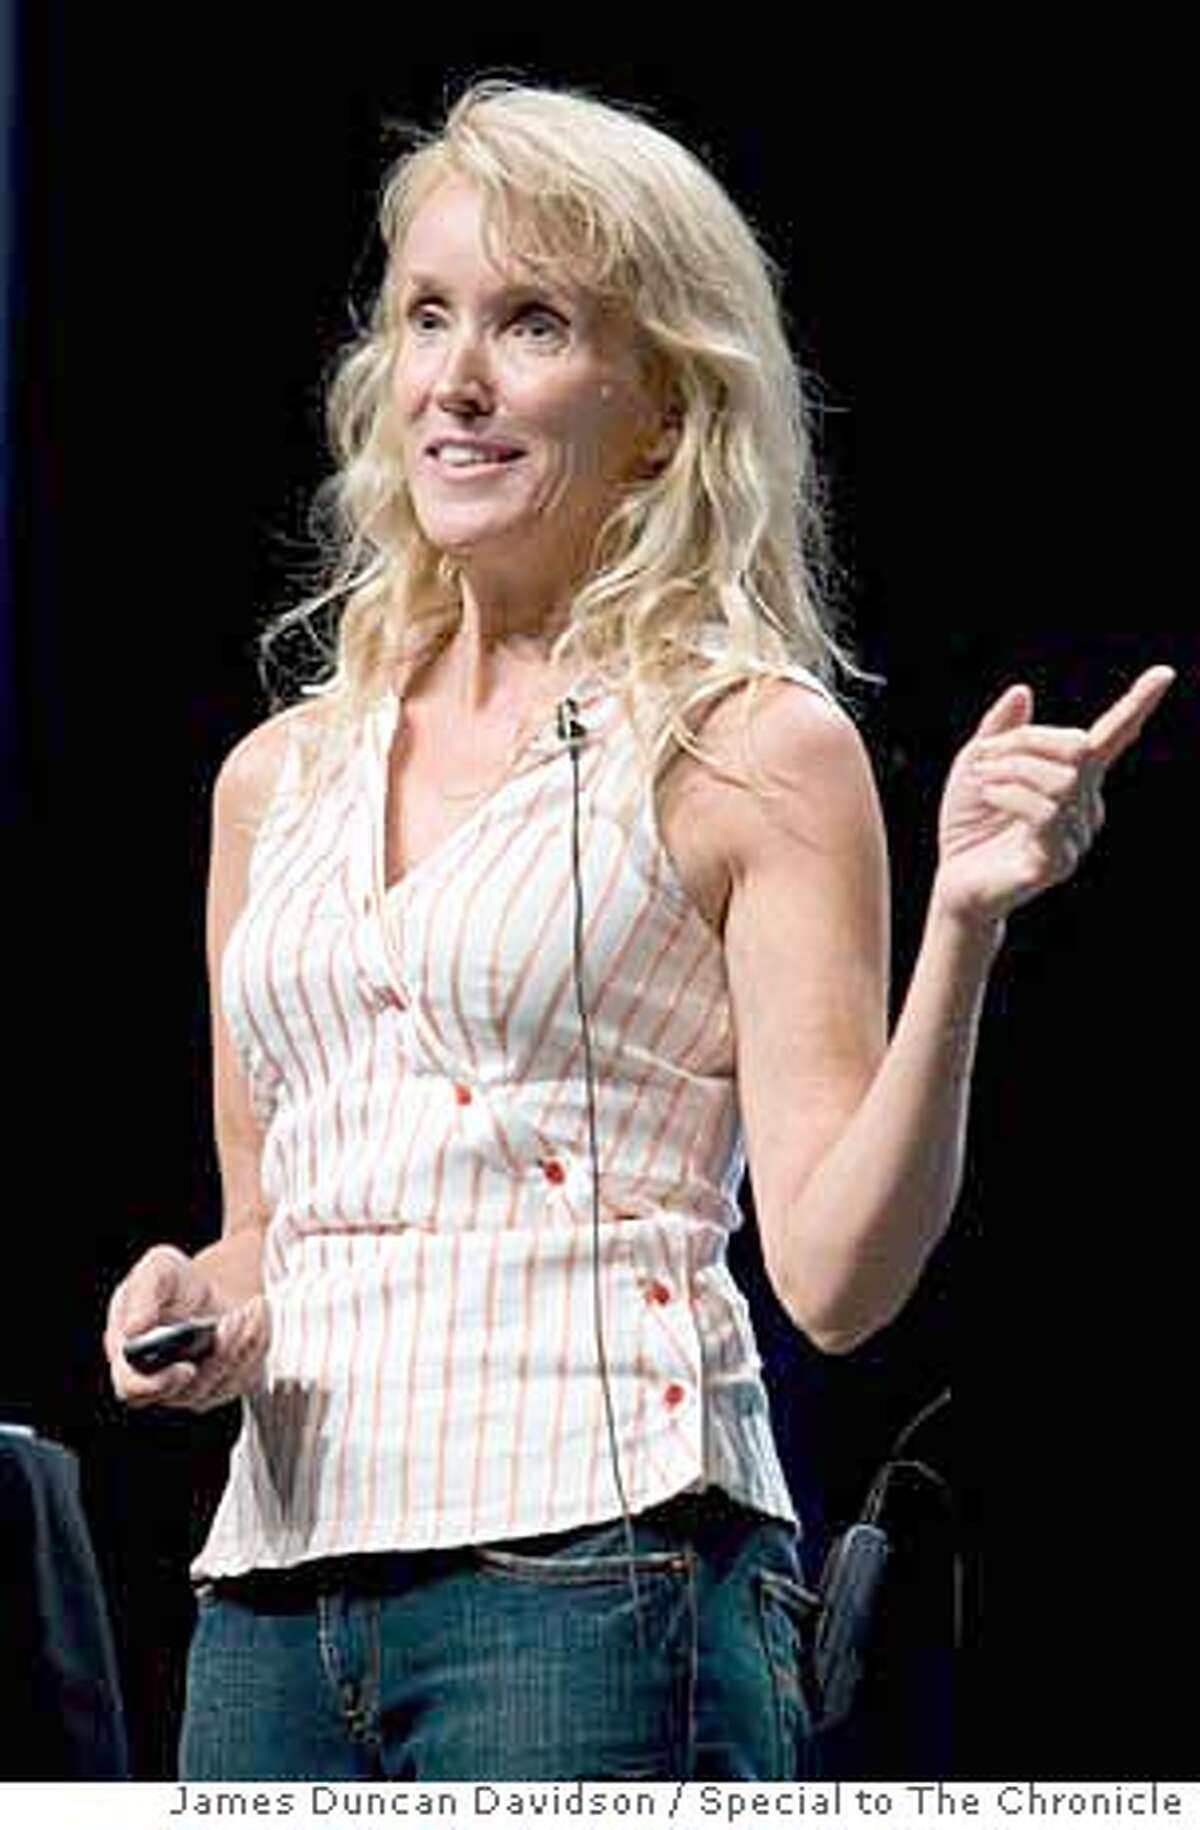 Kathy SIerra speaking at the 2006 O'Reilly Open Source Convention in Portland, Oregon. James Duncan Davidson/Special to The Chronicle